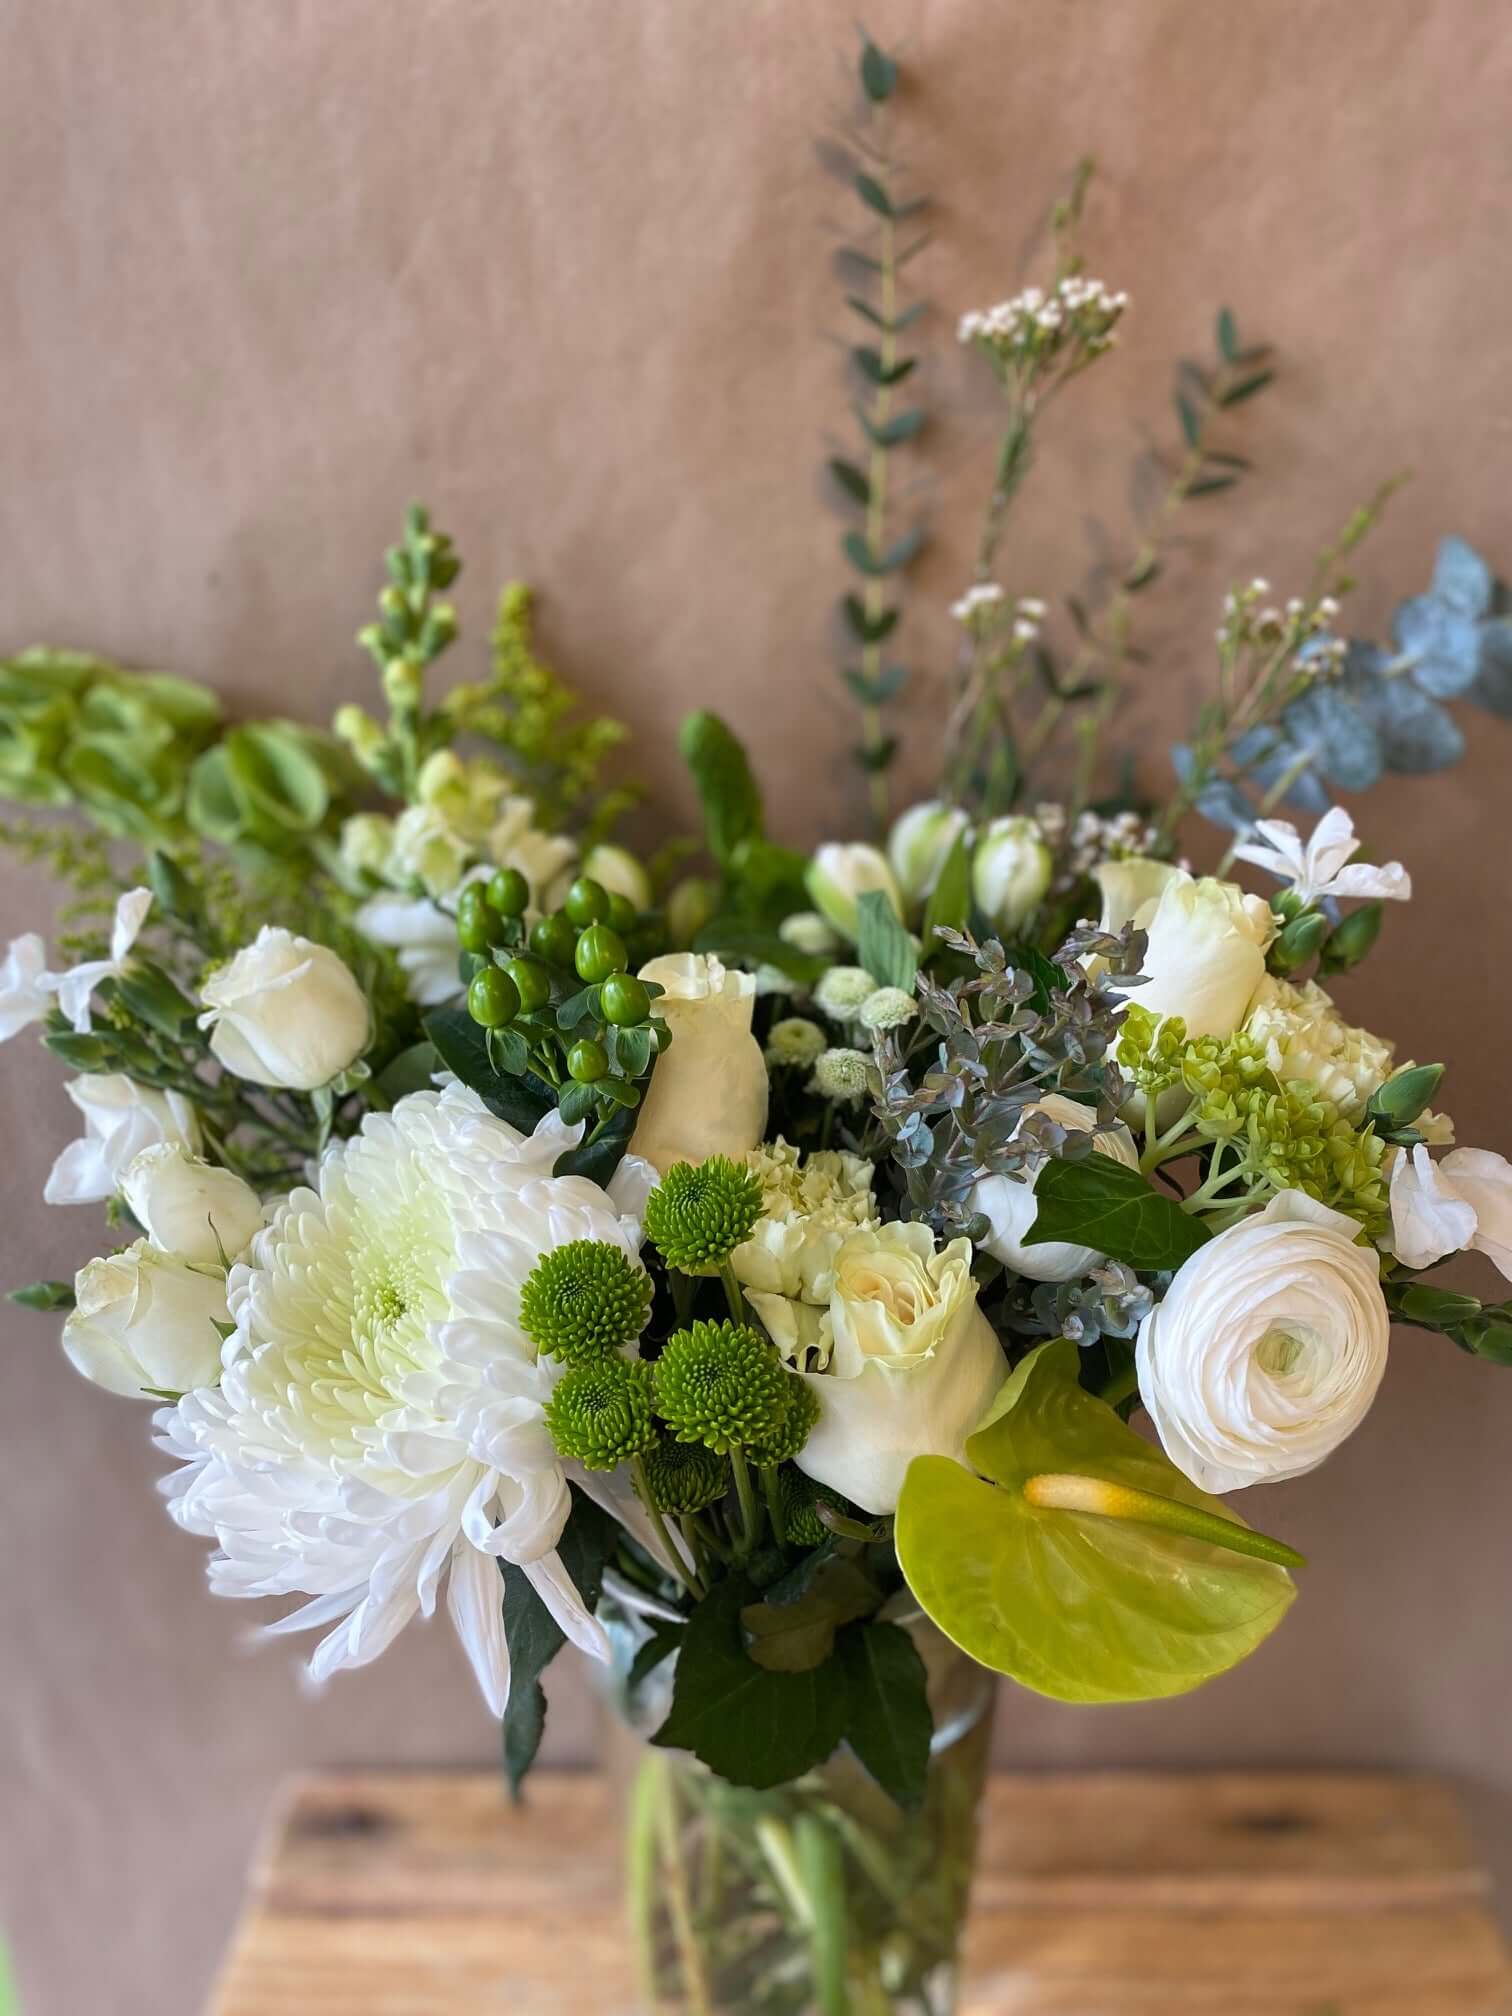 Natural-Style White & Green Vase Arrangement, by Lou-Lou's Flower Truck